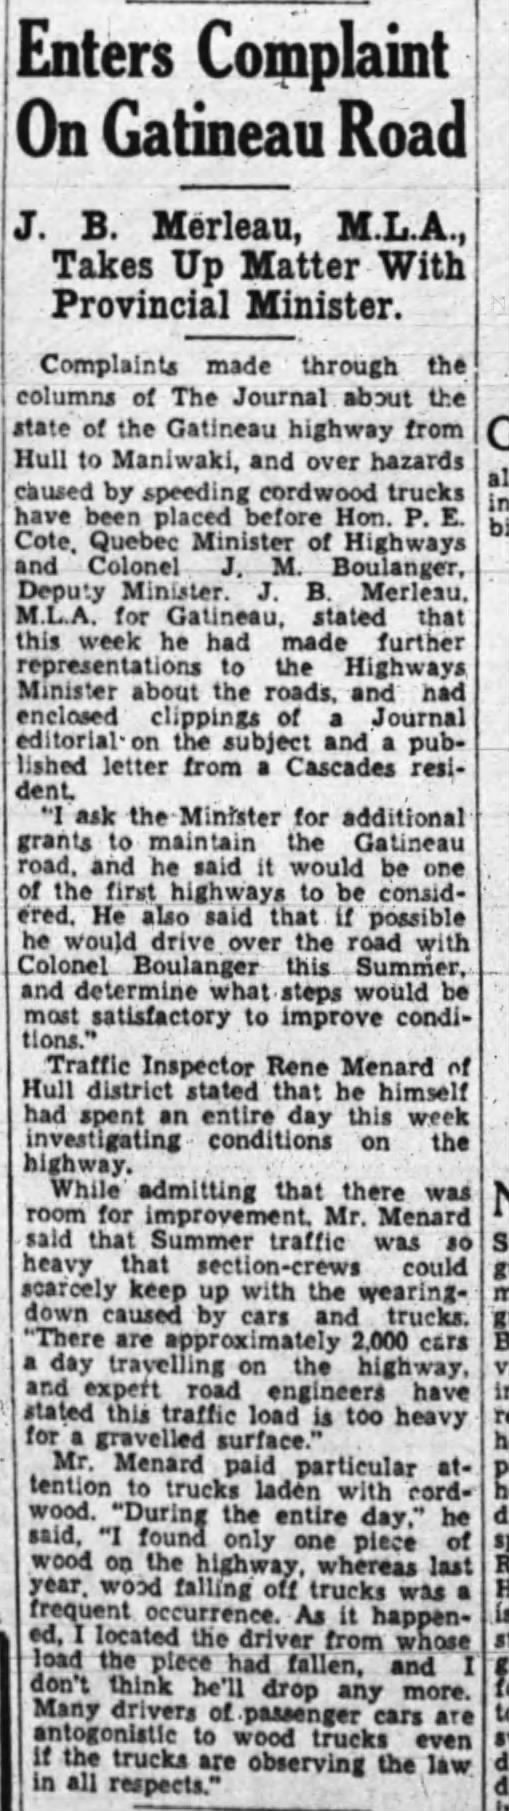 Road condition-July 1936